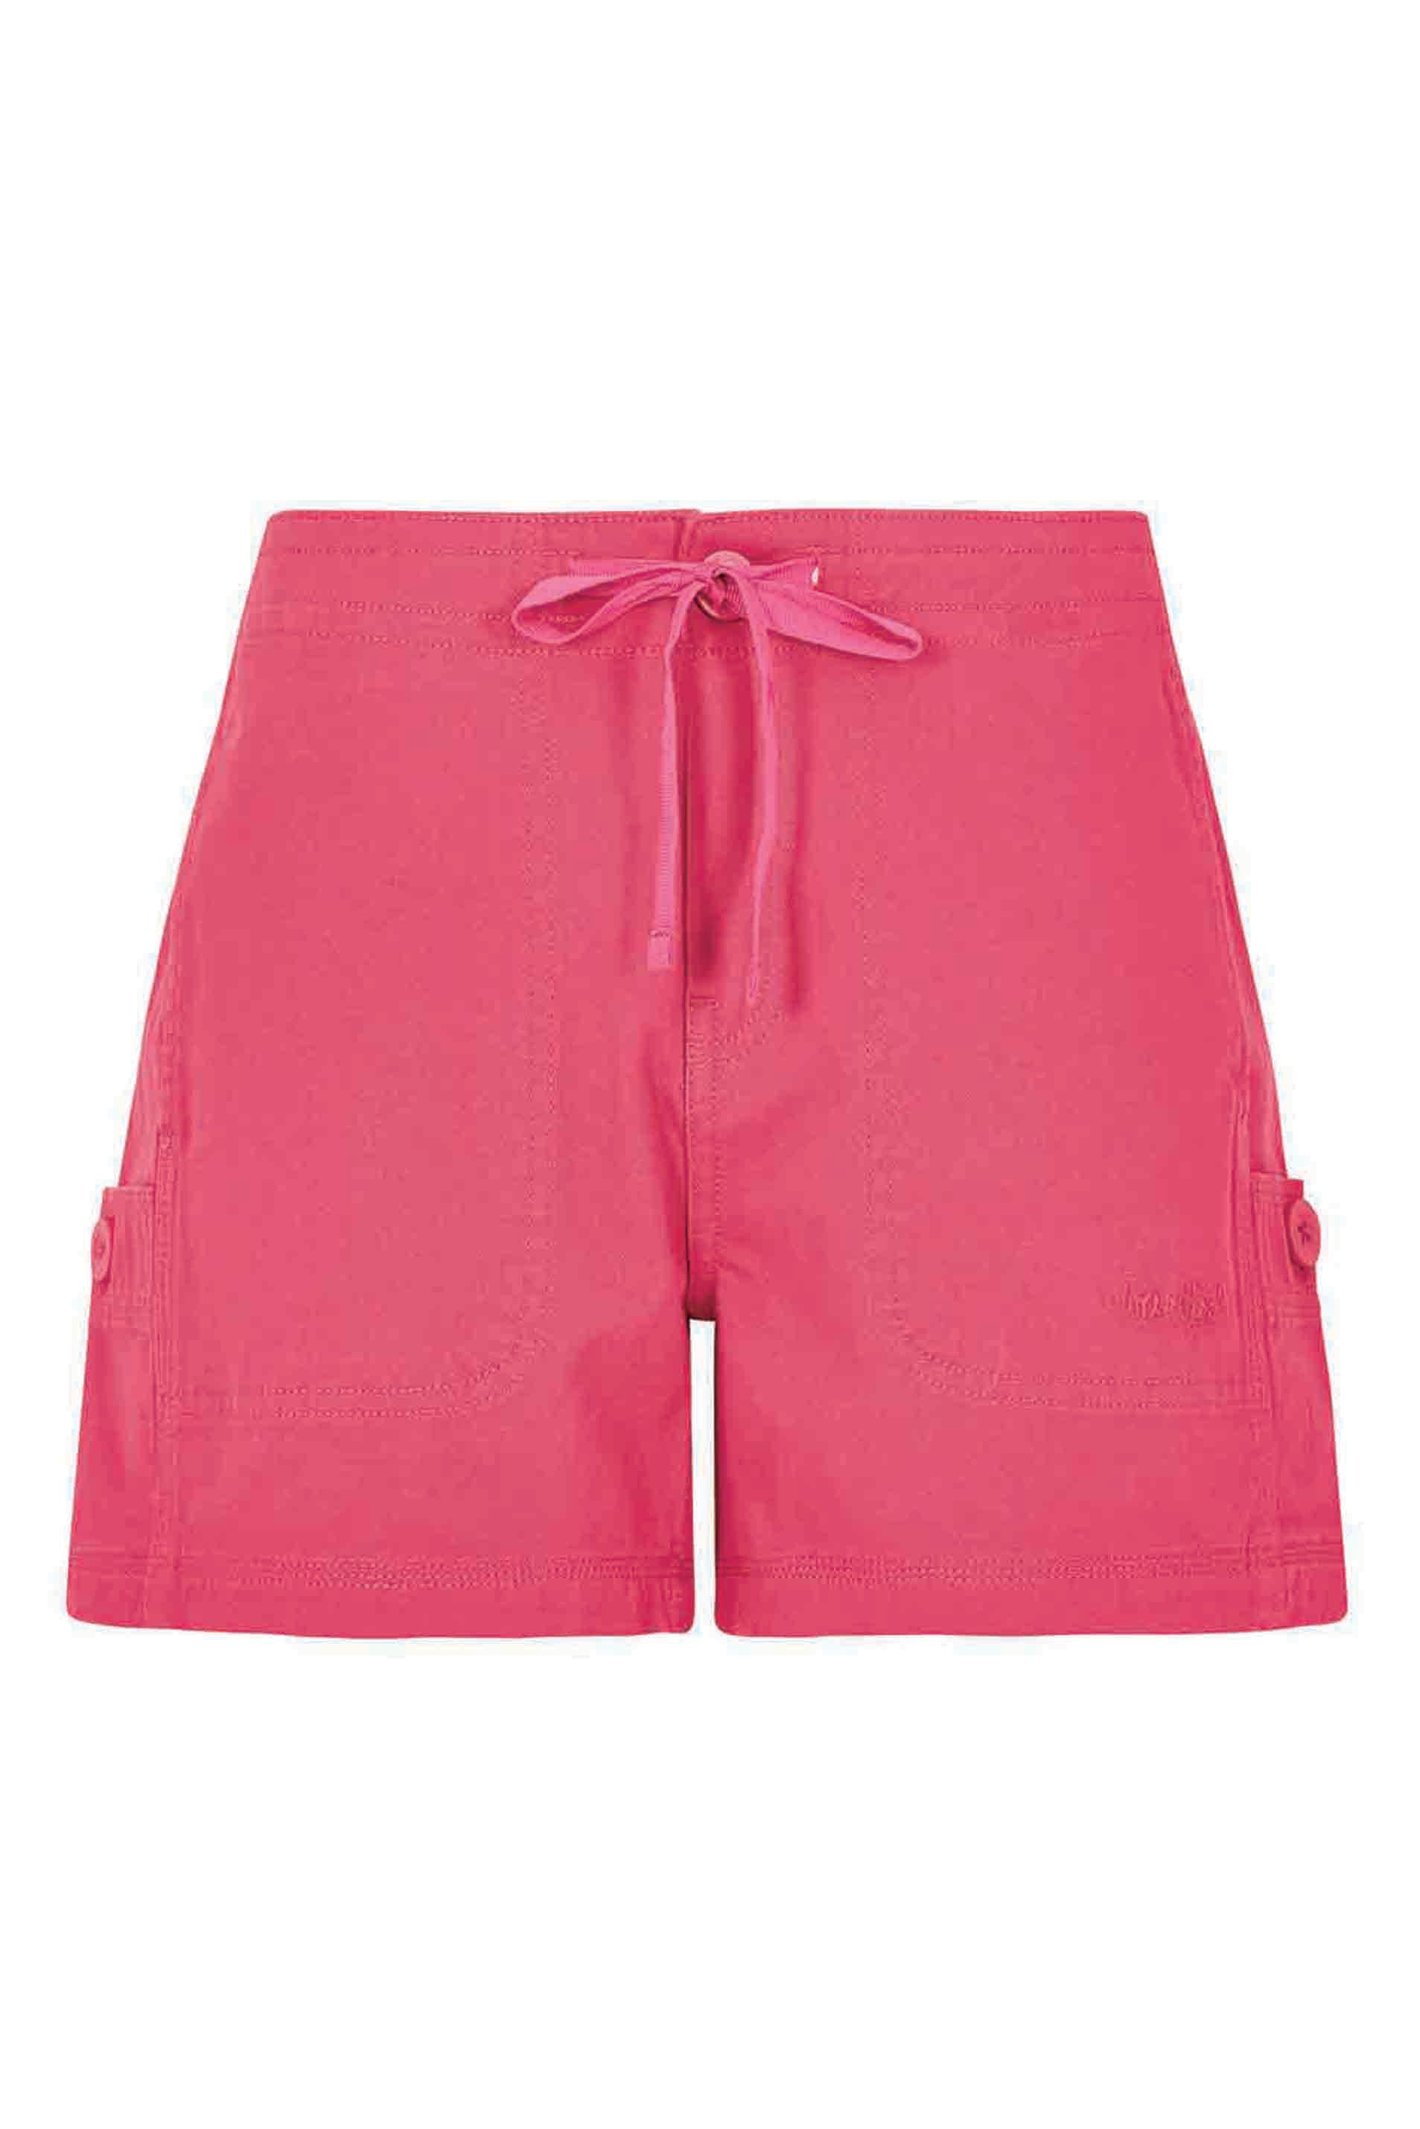 Weird Fish Willoughby Summer Shorts Hot Pink Size 10